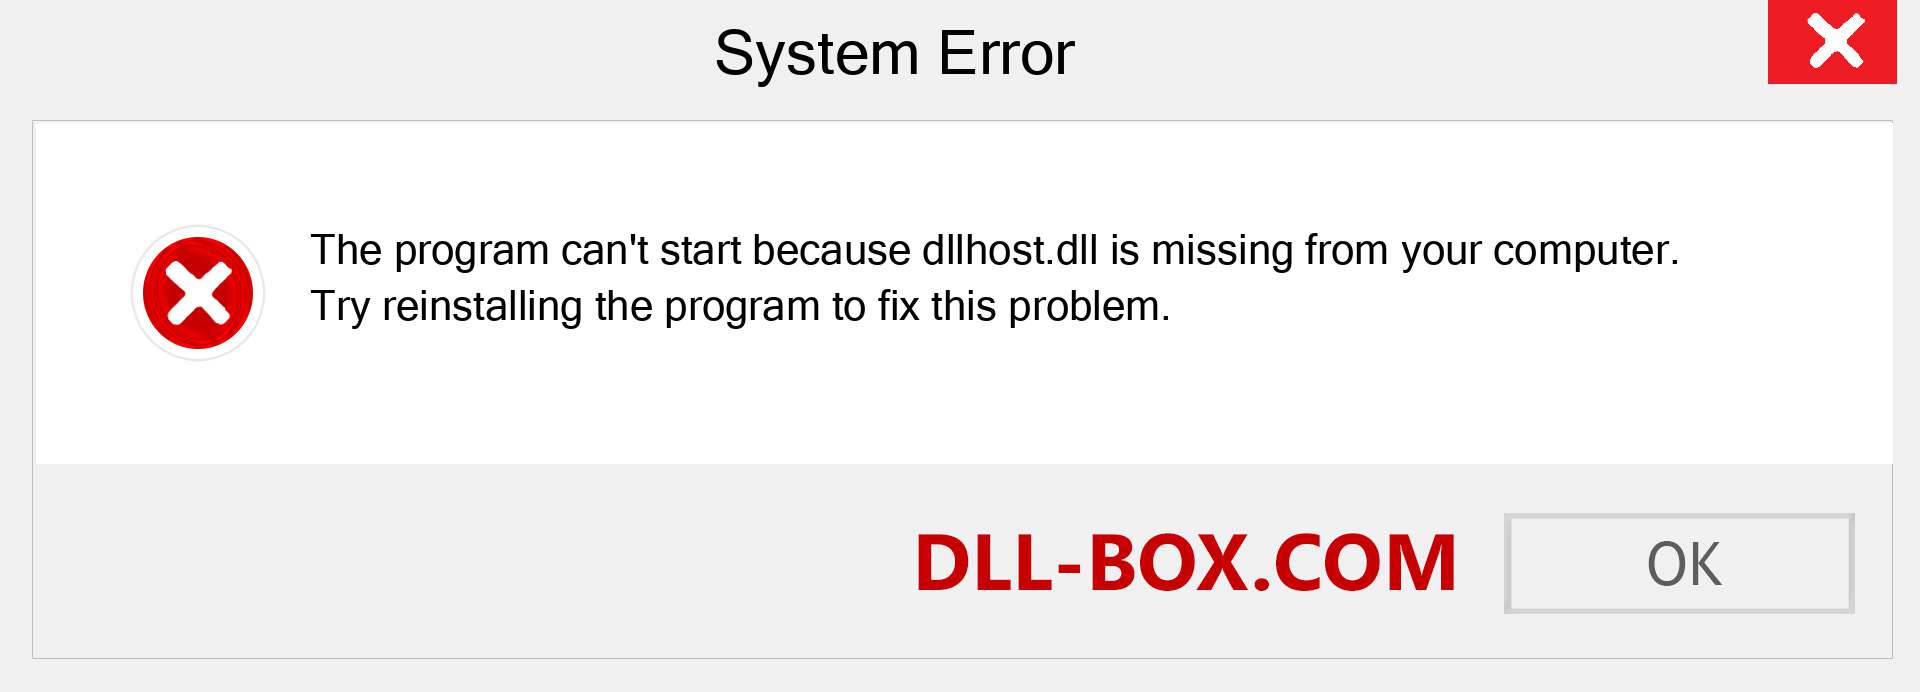  dllhost.dll file is missing?. Download for Windows 7, 8, 10 - Fix  dllhost dll Missing Error on Windows, photos, images